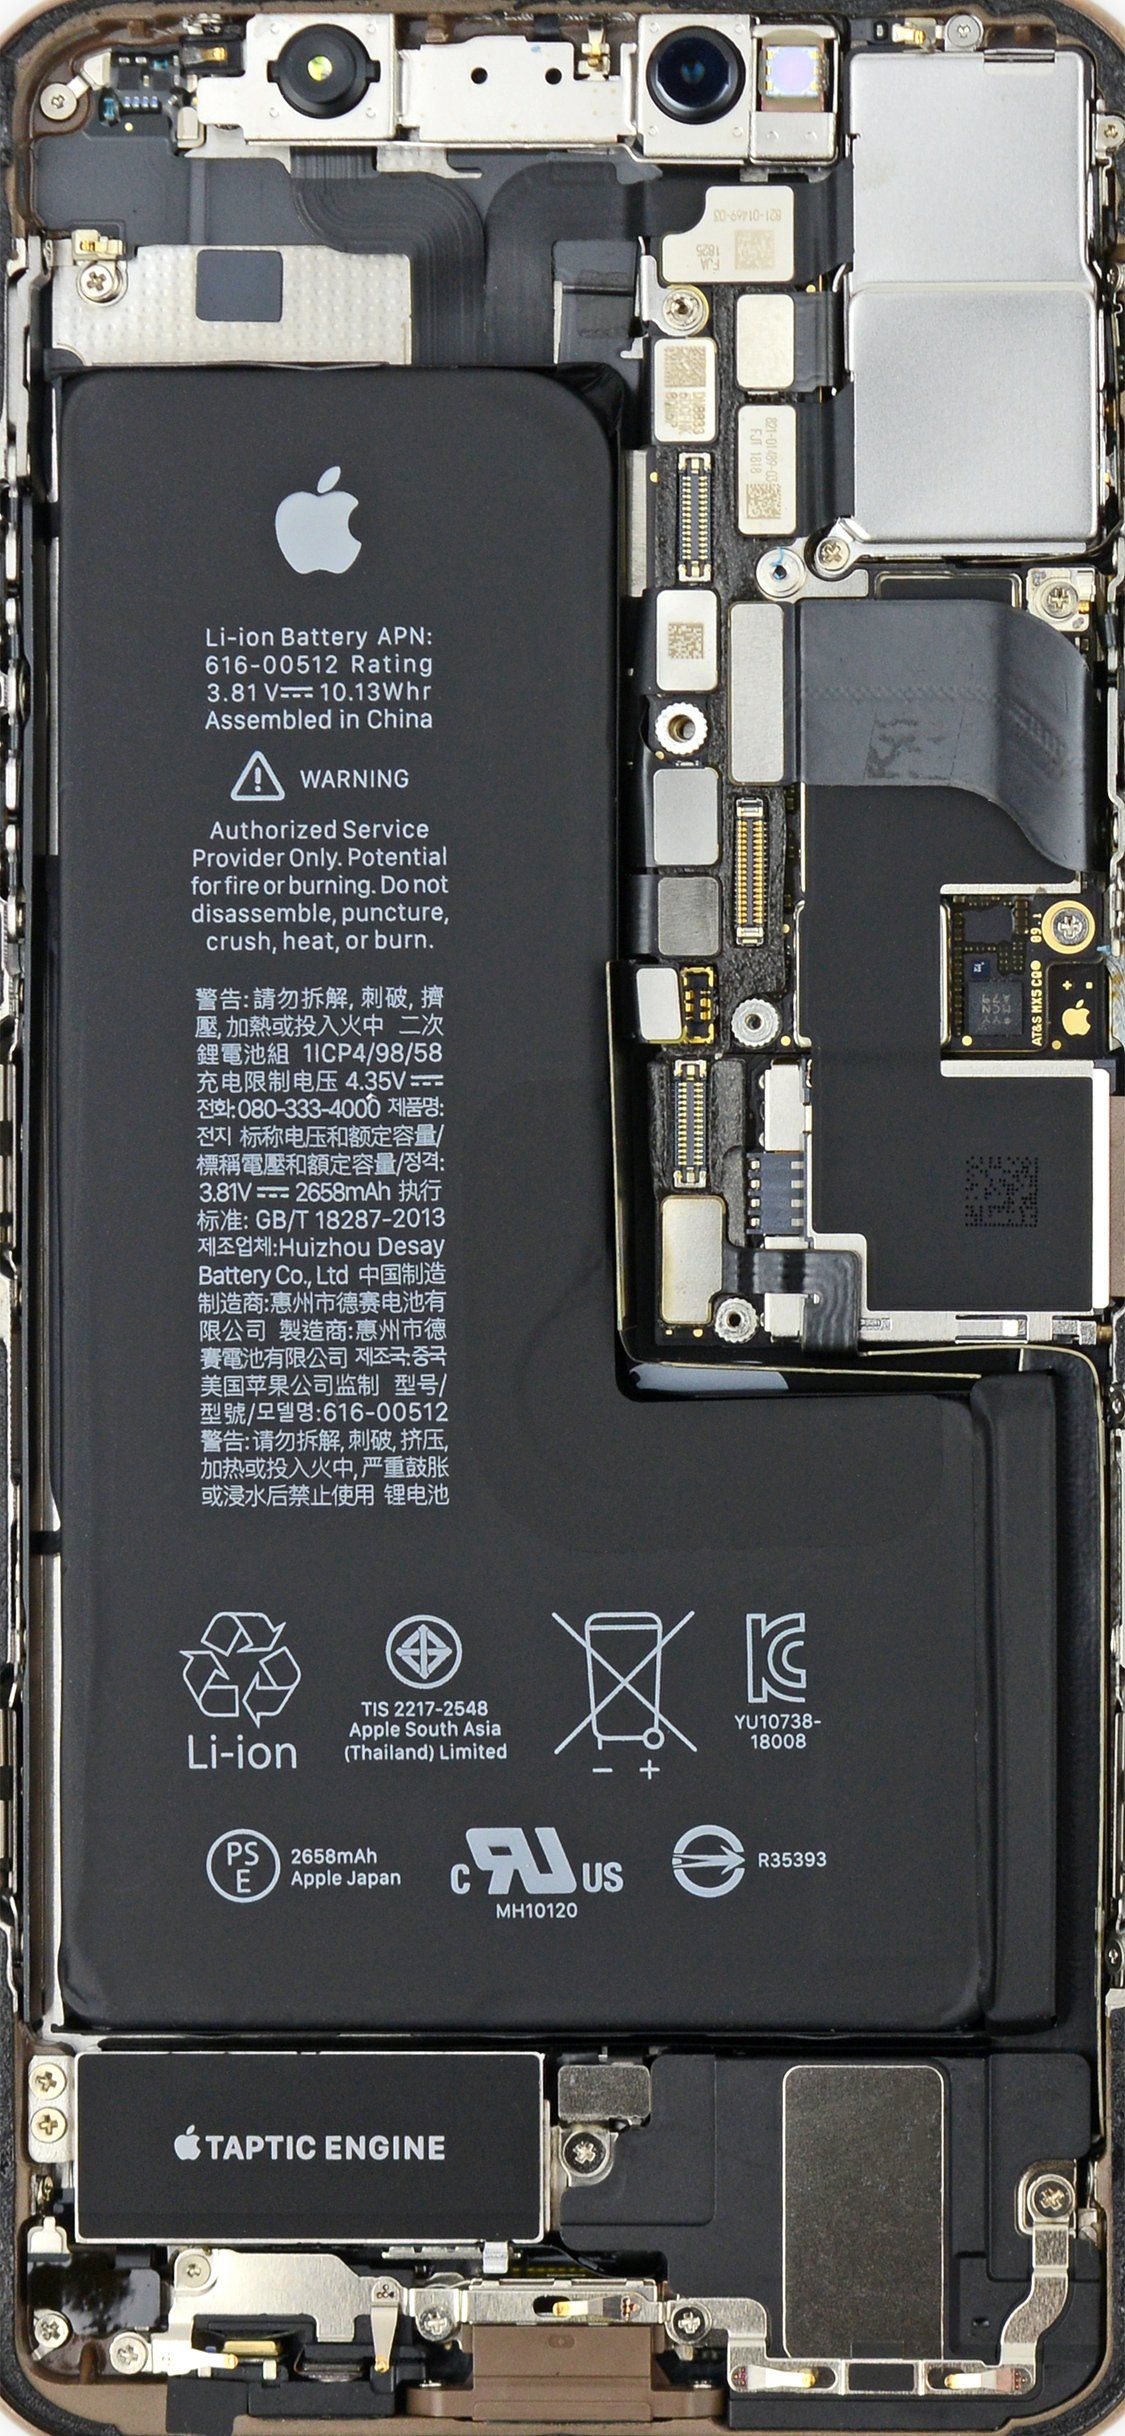 Double the iPhone XS Teardowns = Double the Wallpaper